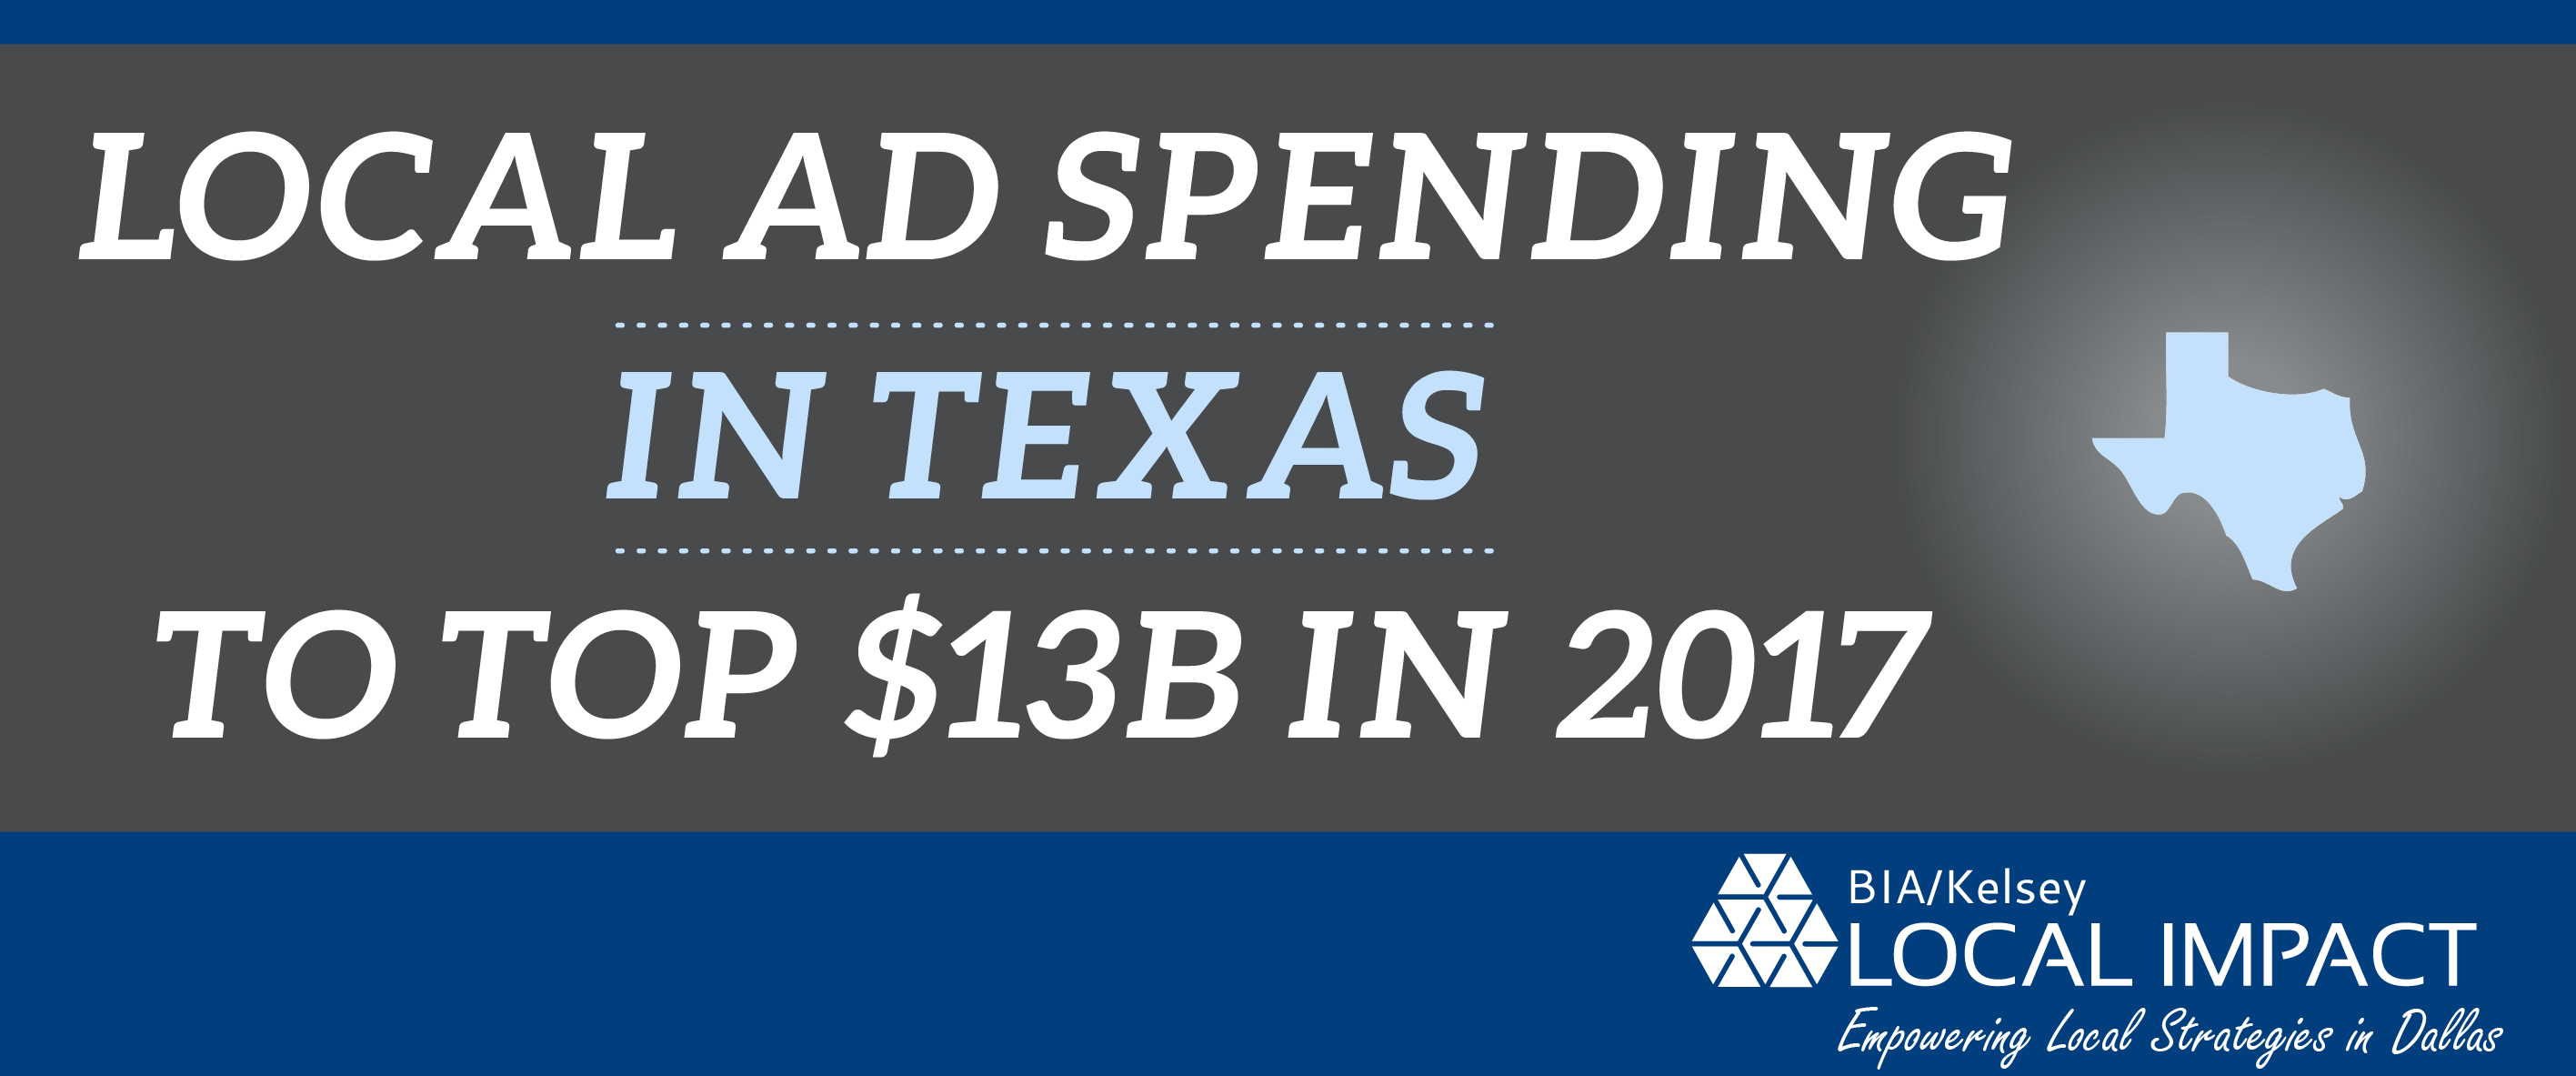 Local Ad Spending In Texas To Top $13 Billion In 2017